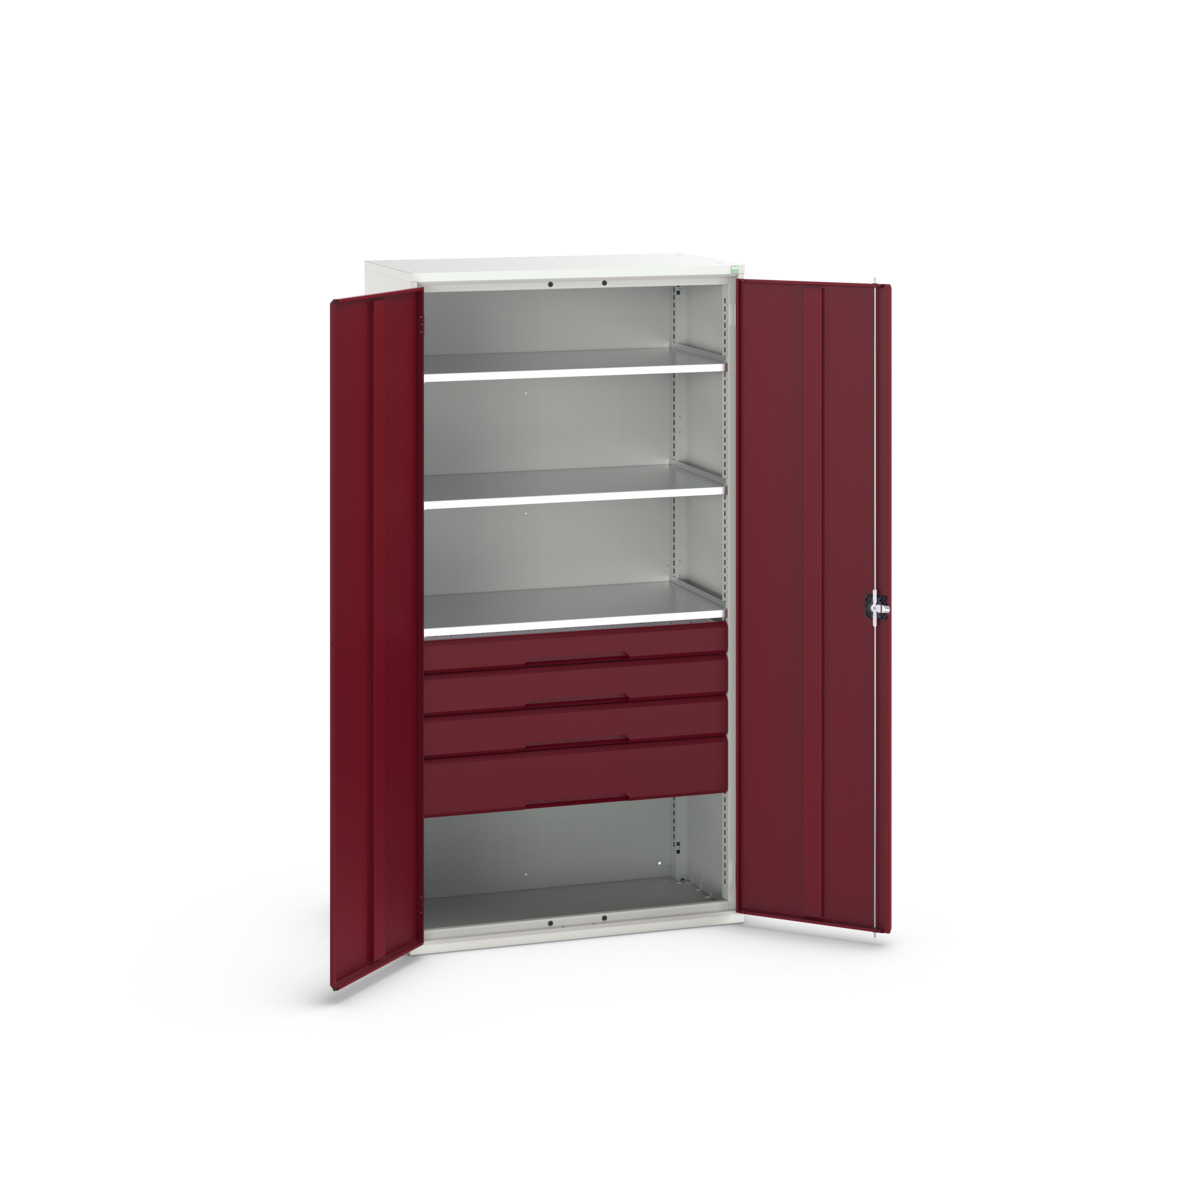 16926576.24 - verso kitted cupboard